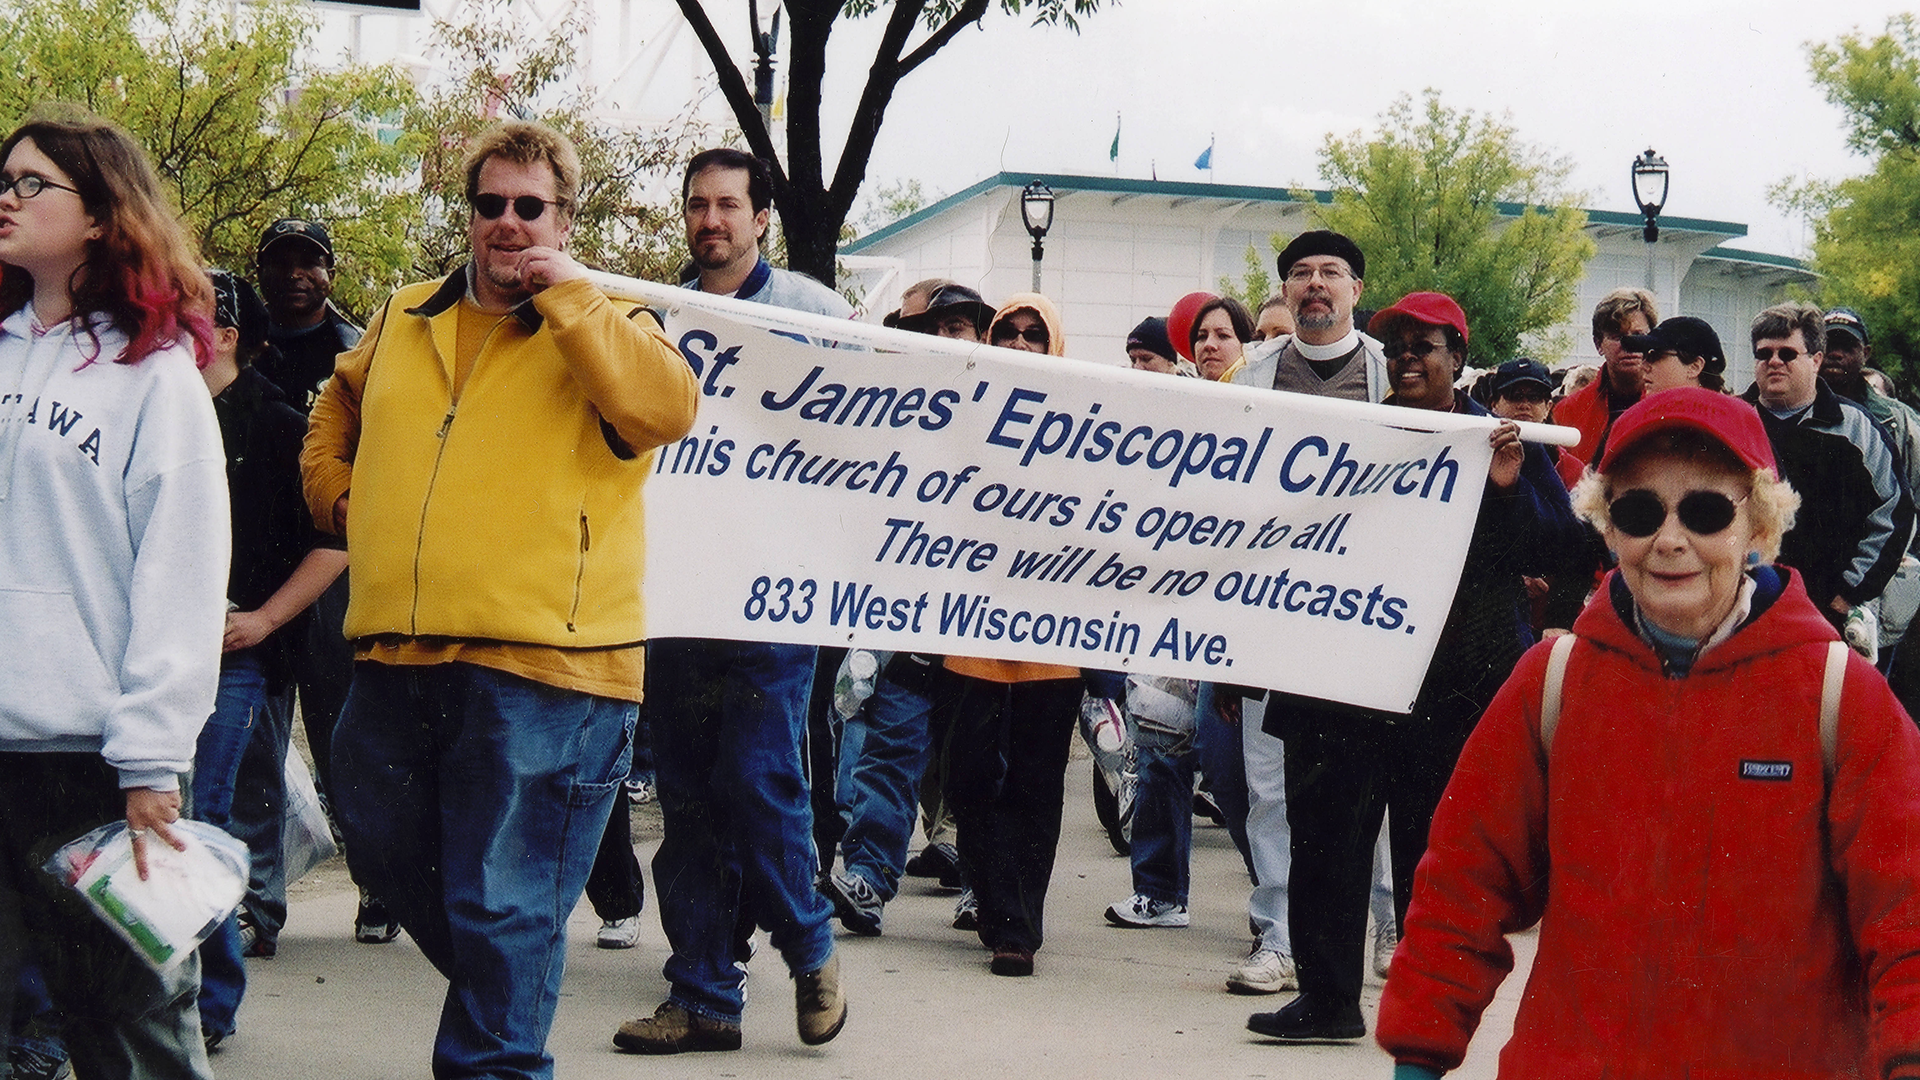 AIDS Walk Wisconsin: Walkers holding a sign that reads 'St. James Episcopal Church. This church of ours is open to all. There will be no outcasts.'